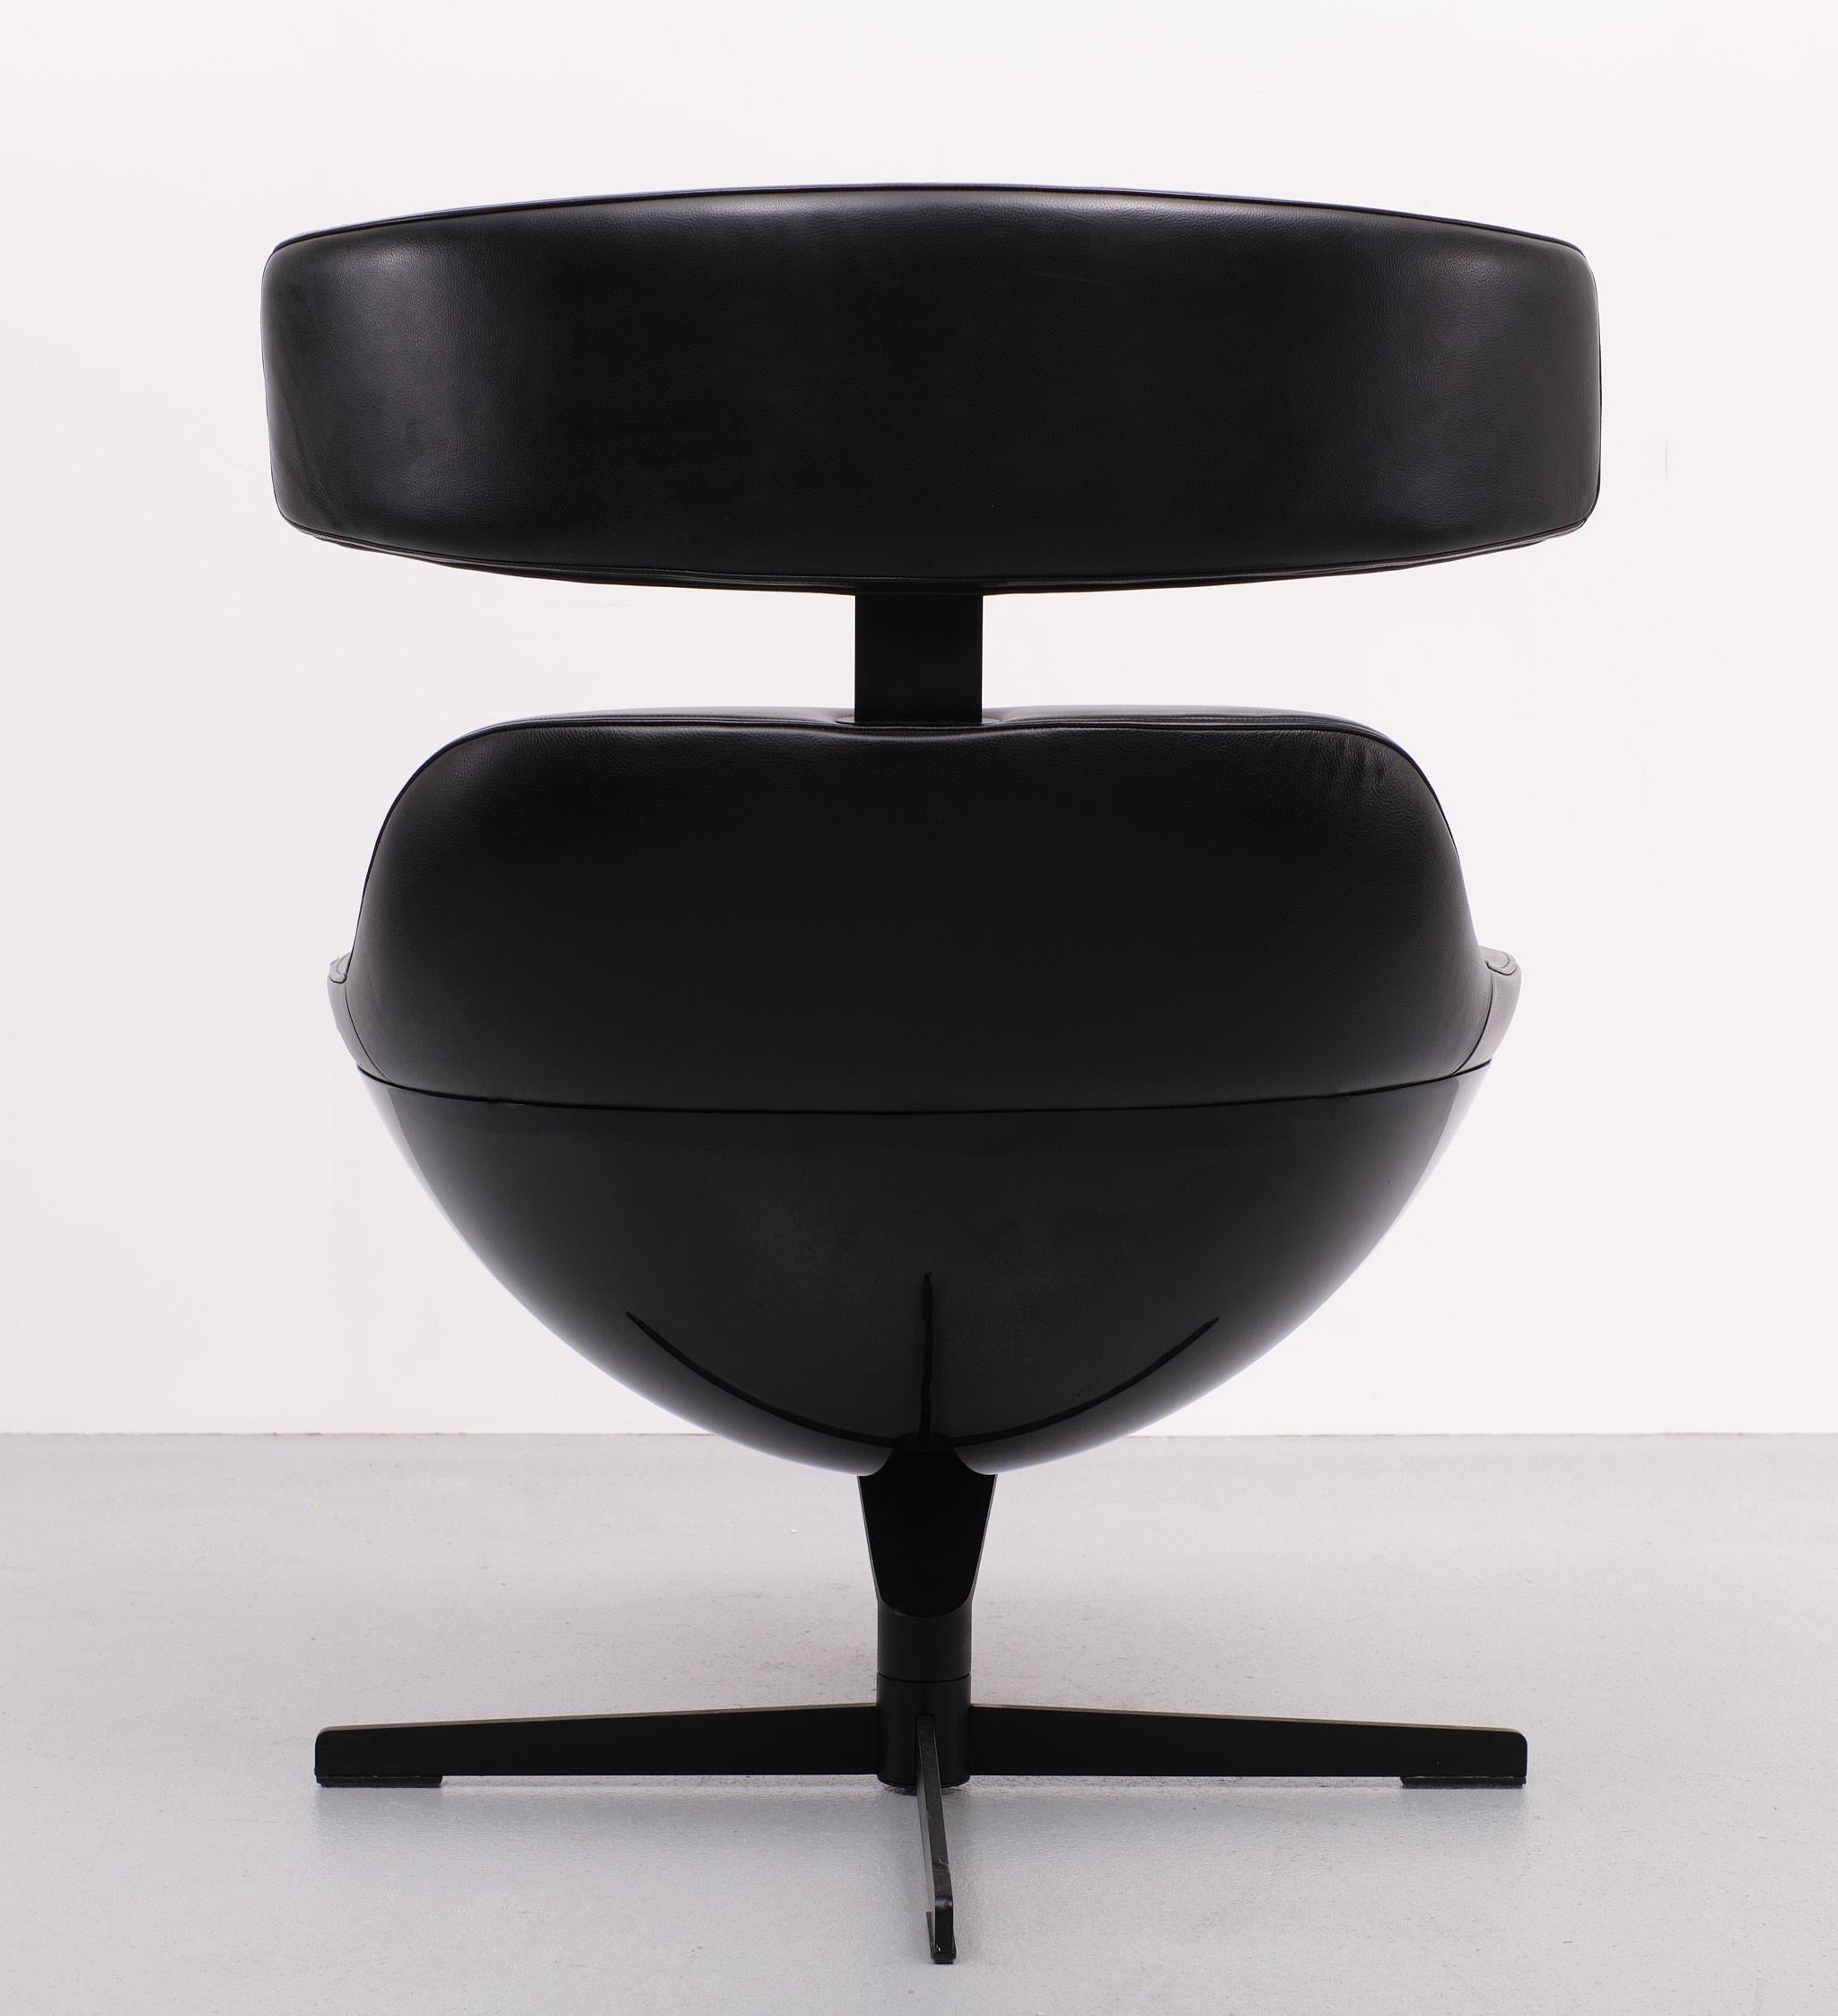  The 277 Auckland Lounge chair  Designed by Jean Marie Massaud  for  Cassina  1